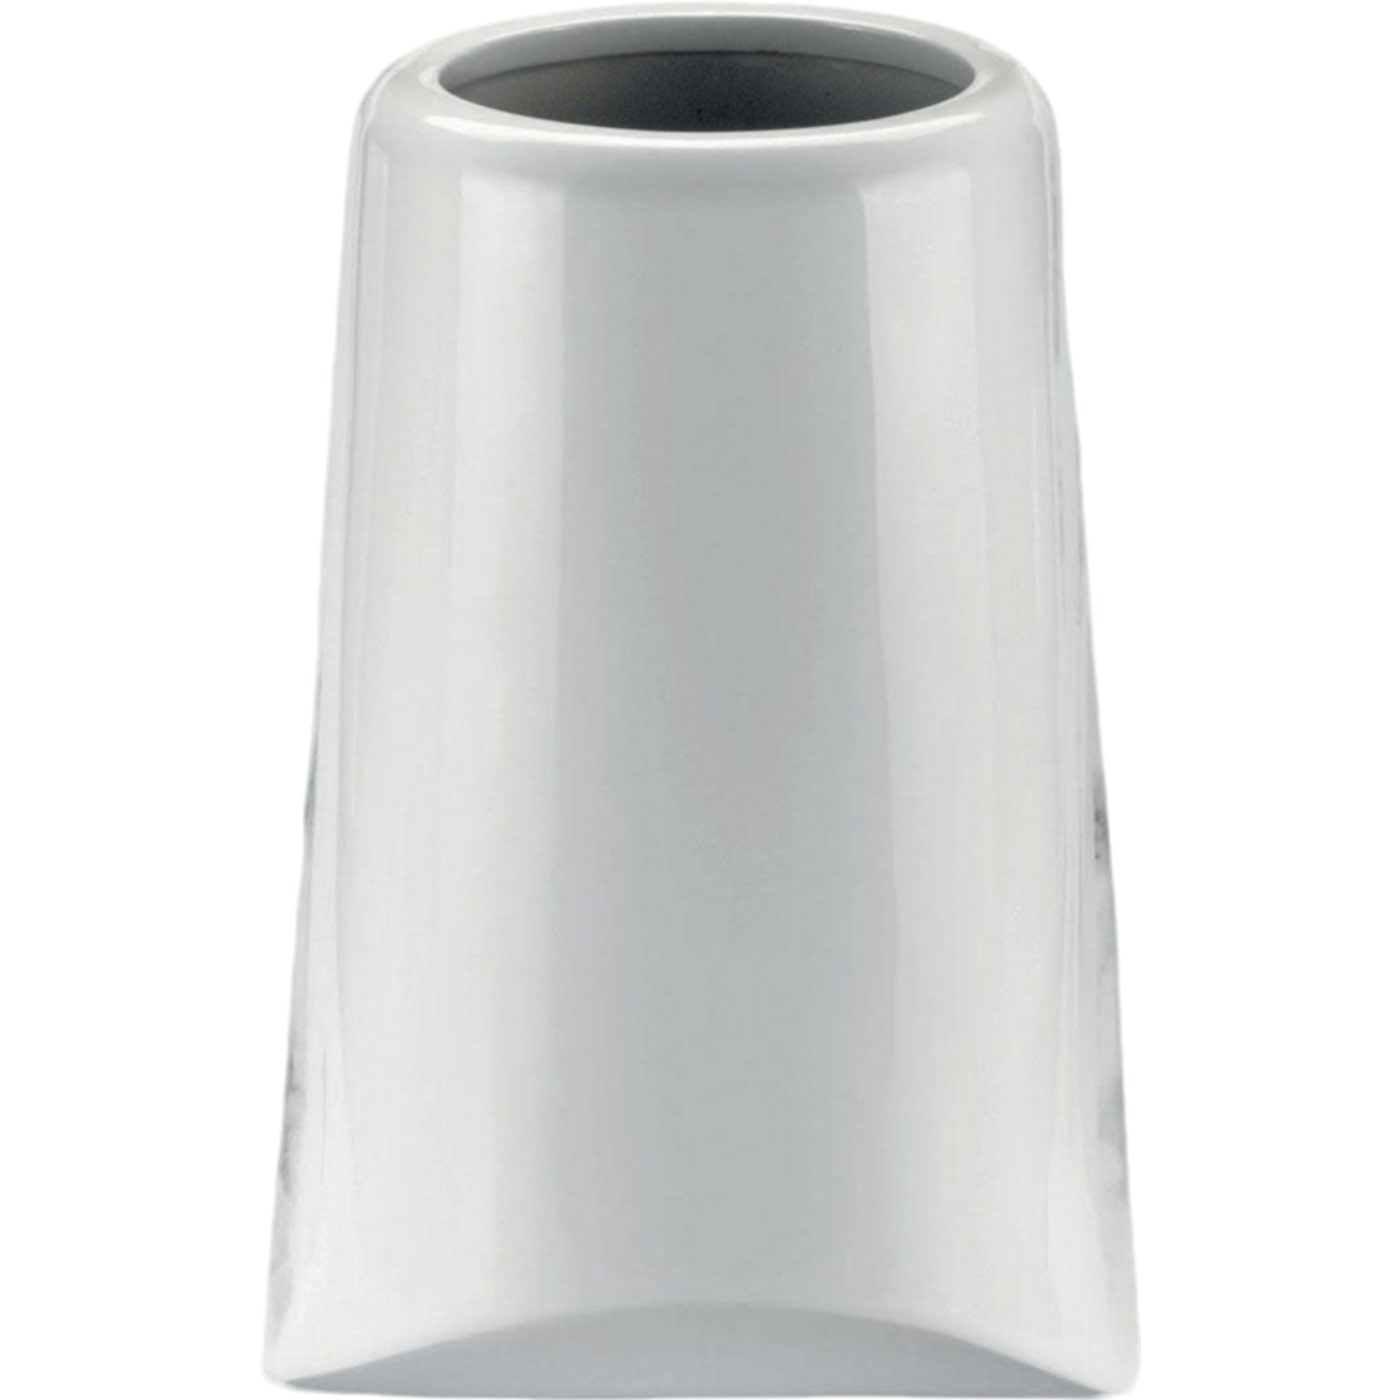 Grave vase Giselle carrara 21x13cm - 8.3x5.1in In white porcelain with carrara decoration, wall attached GI128P/CARR